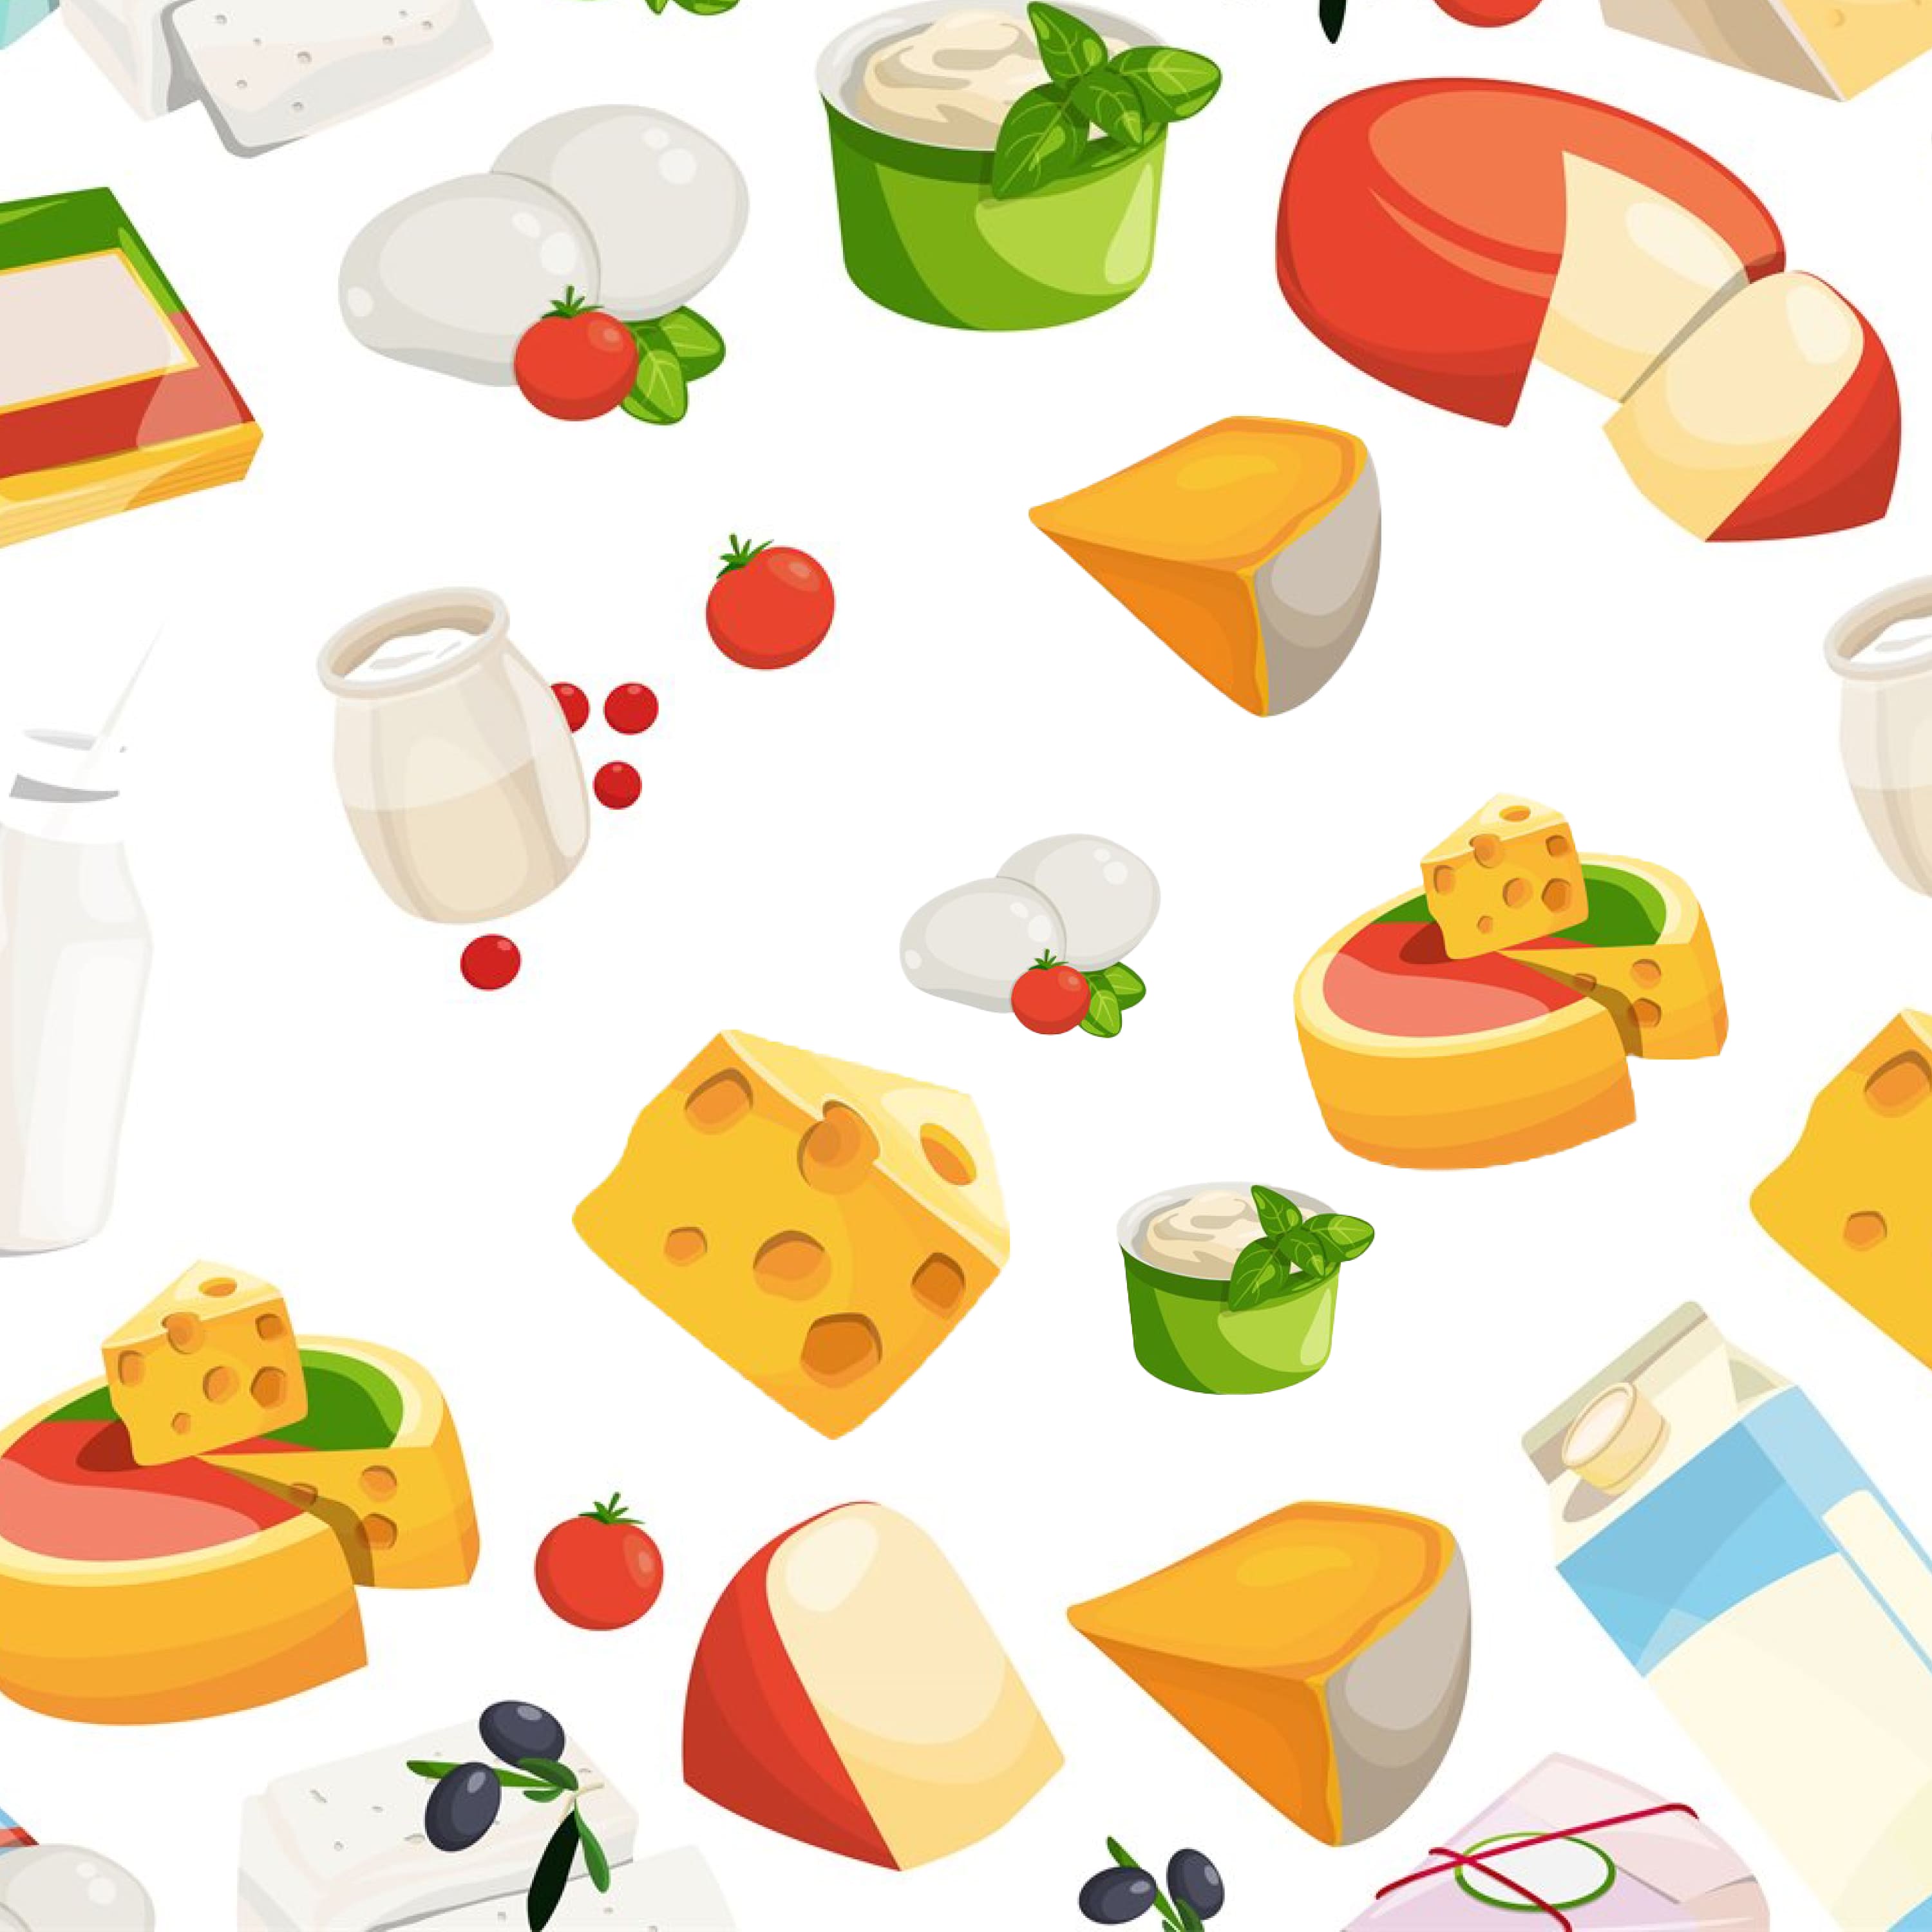 Set of cartoon images of cheese and milk.